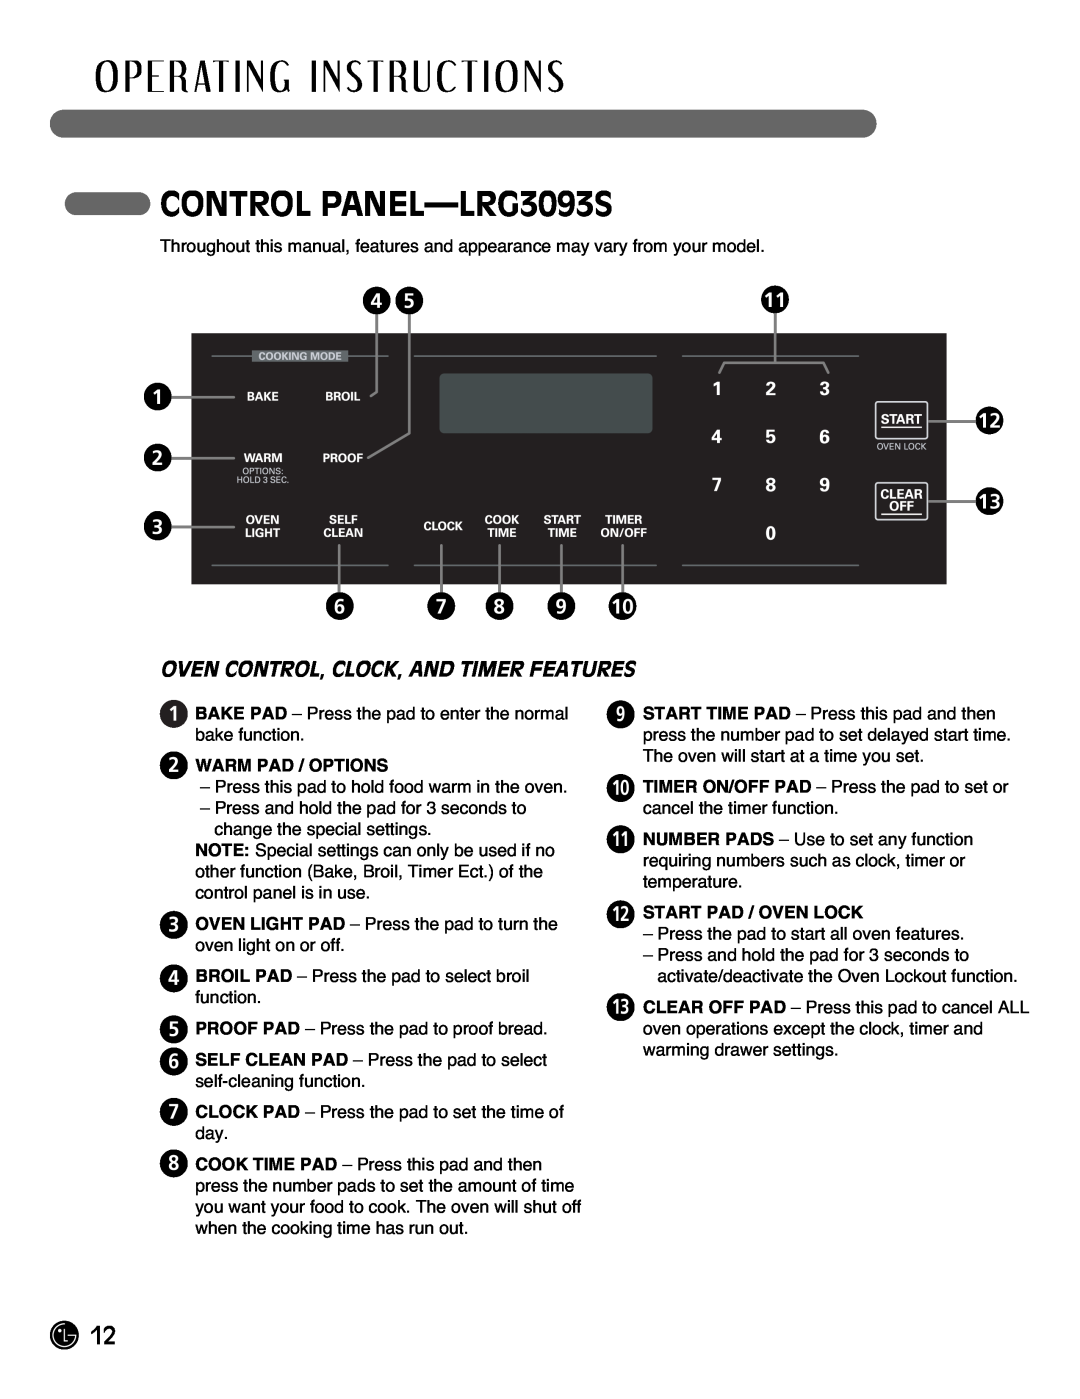 LG Electronics LRG3093SB CONTROL PANEL-LRG3093S, Oven Control, Clock, And Timer Features, 6 7 8 9, Warm Pad / Options 